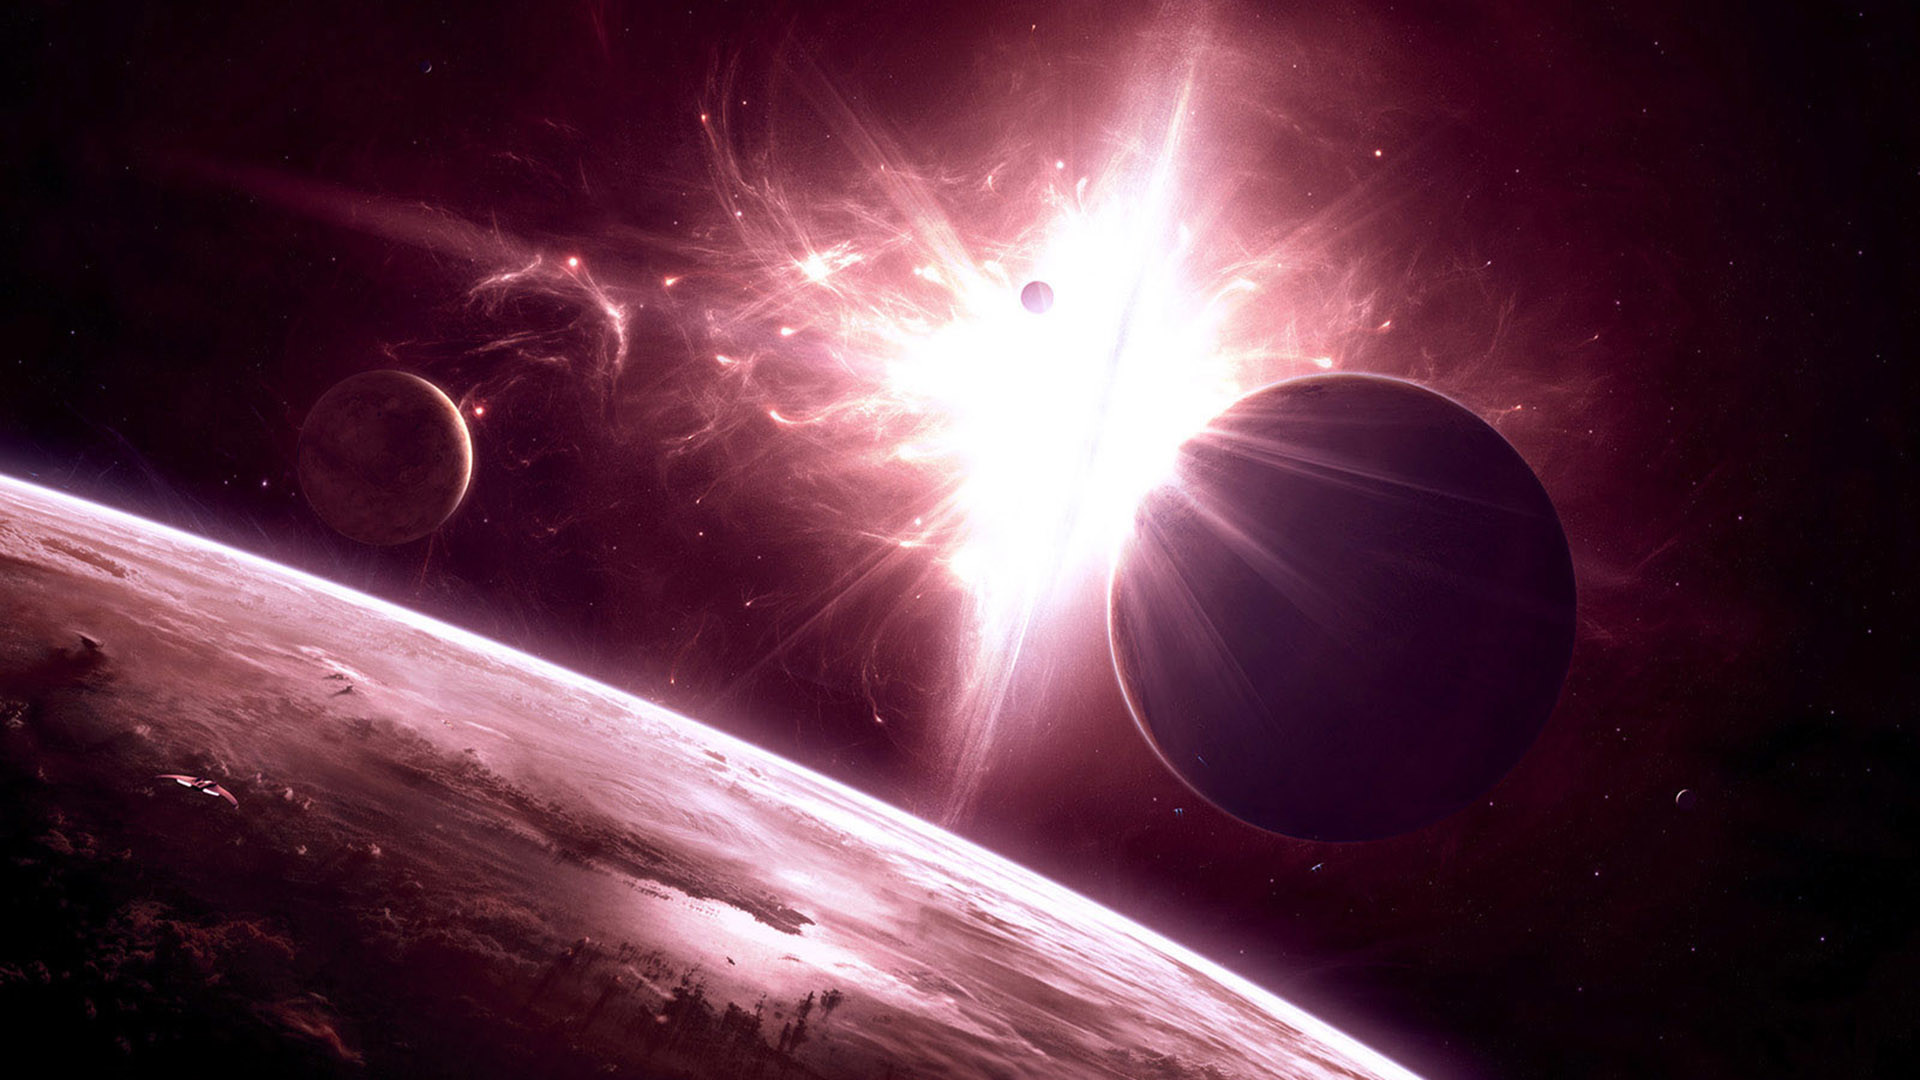 1920x1080 File Name: #891910  Space Browser Themes & Desktop Wallpapers